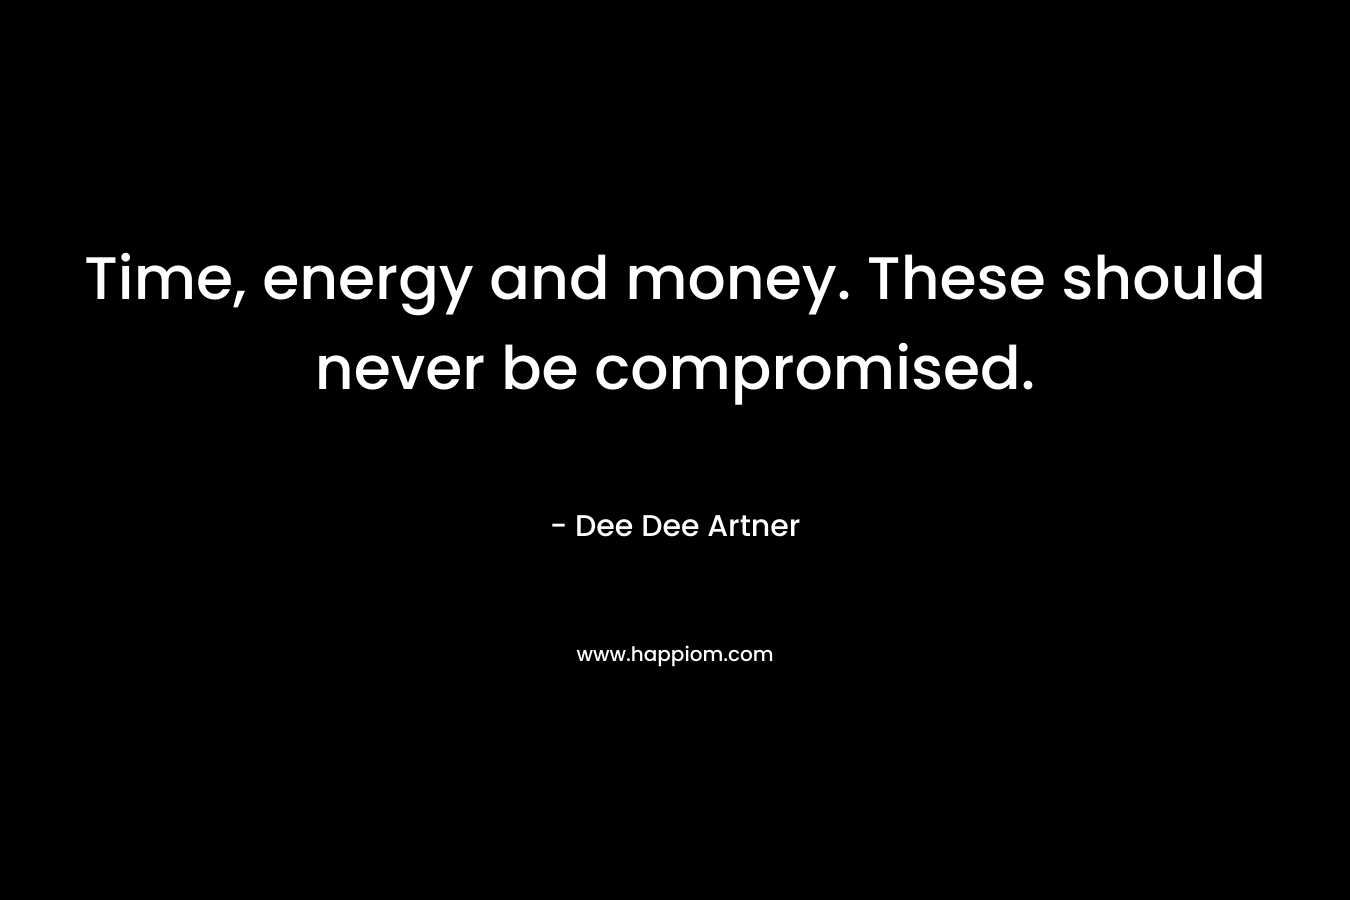 Time, energy and money. These should never be compromised. – Dee Dee Artner